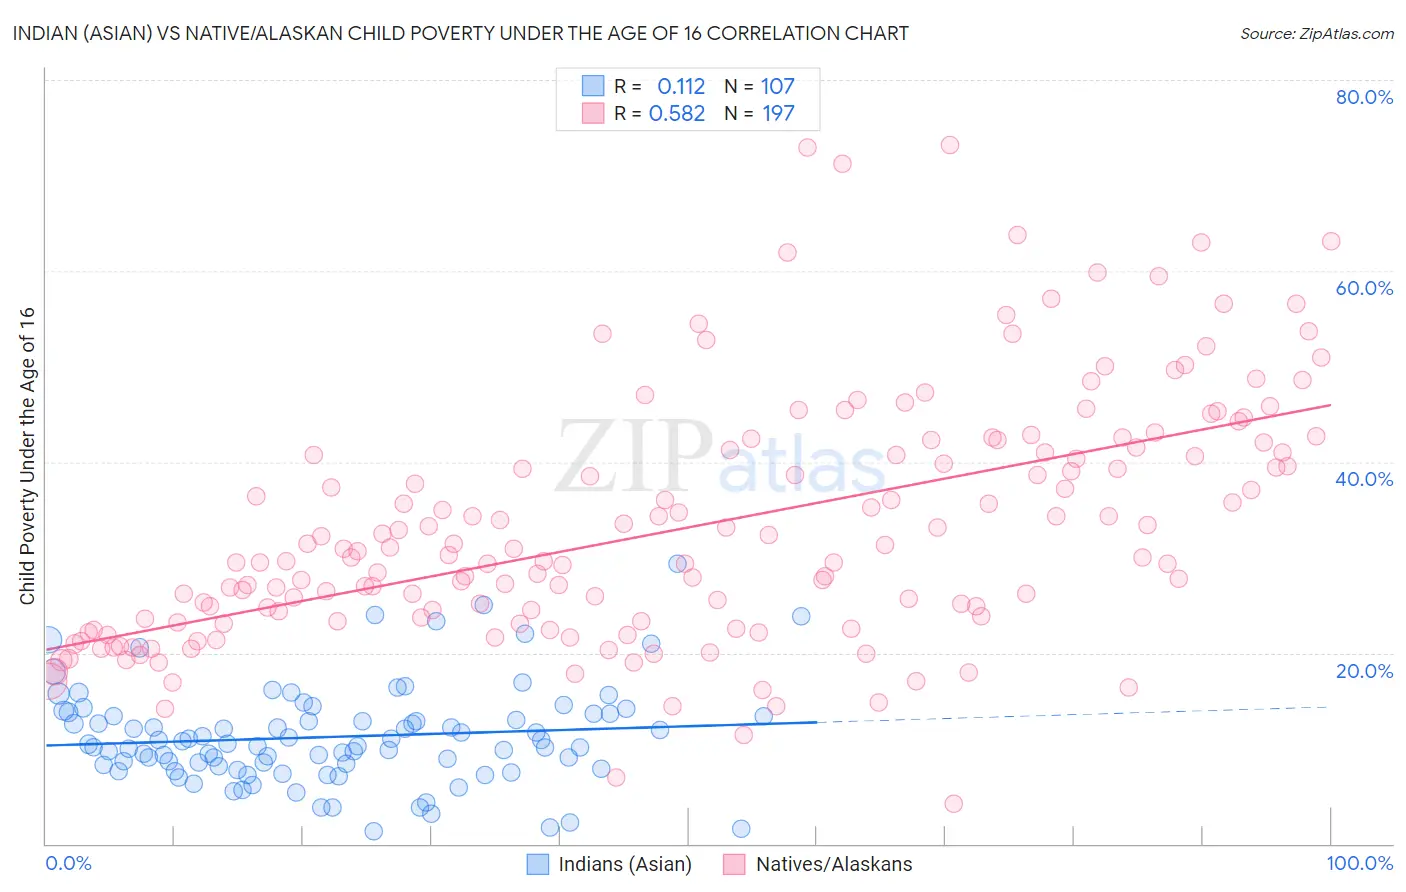 Indian (Asian) vs Native/Alaskan Child Poverty Under the Age of 16